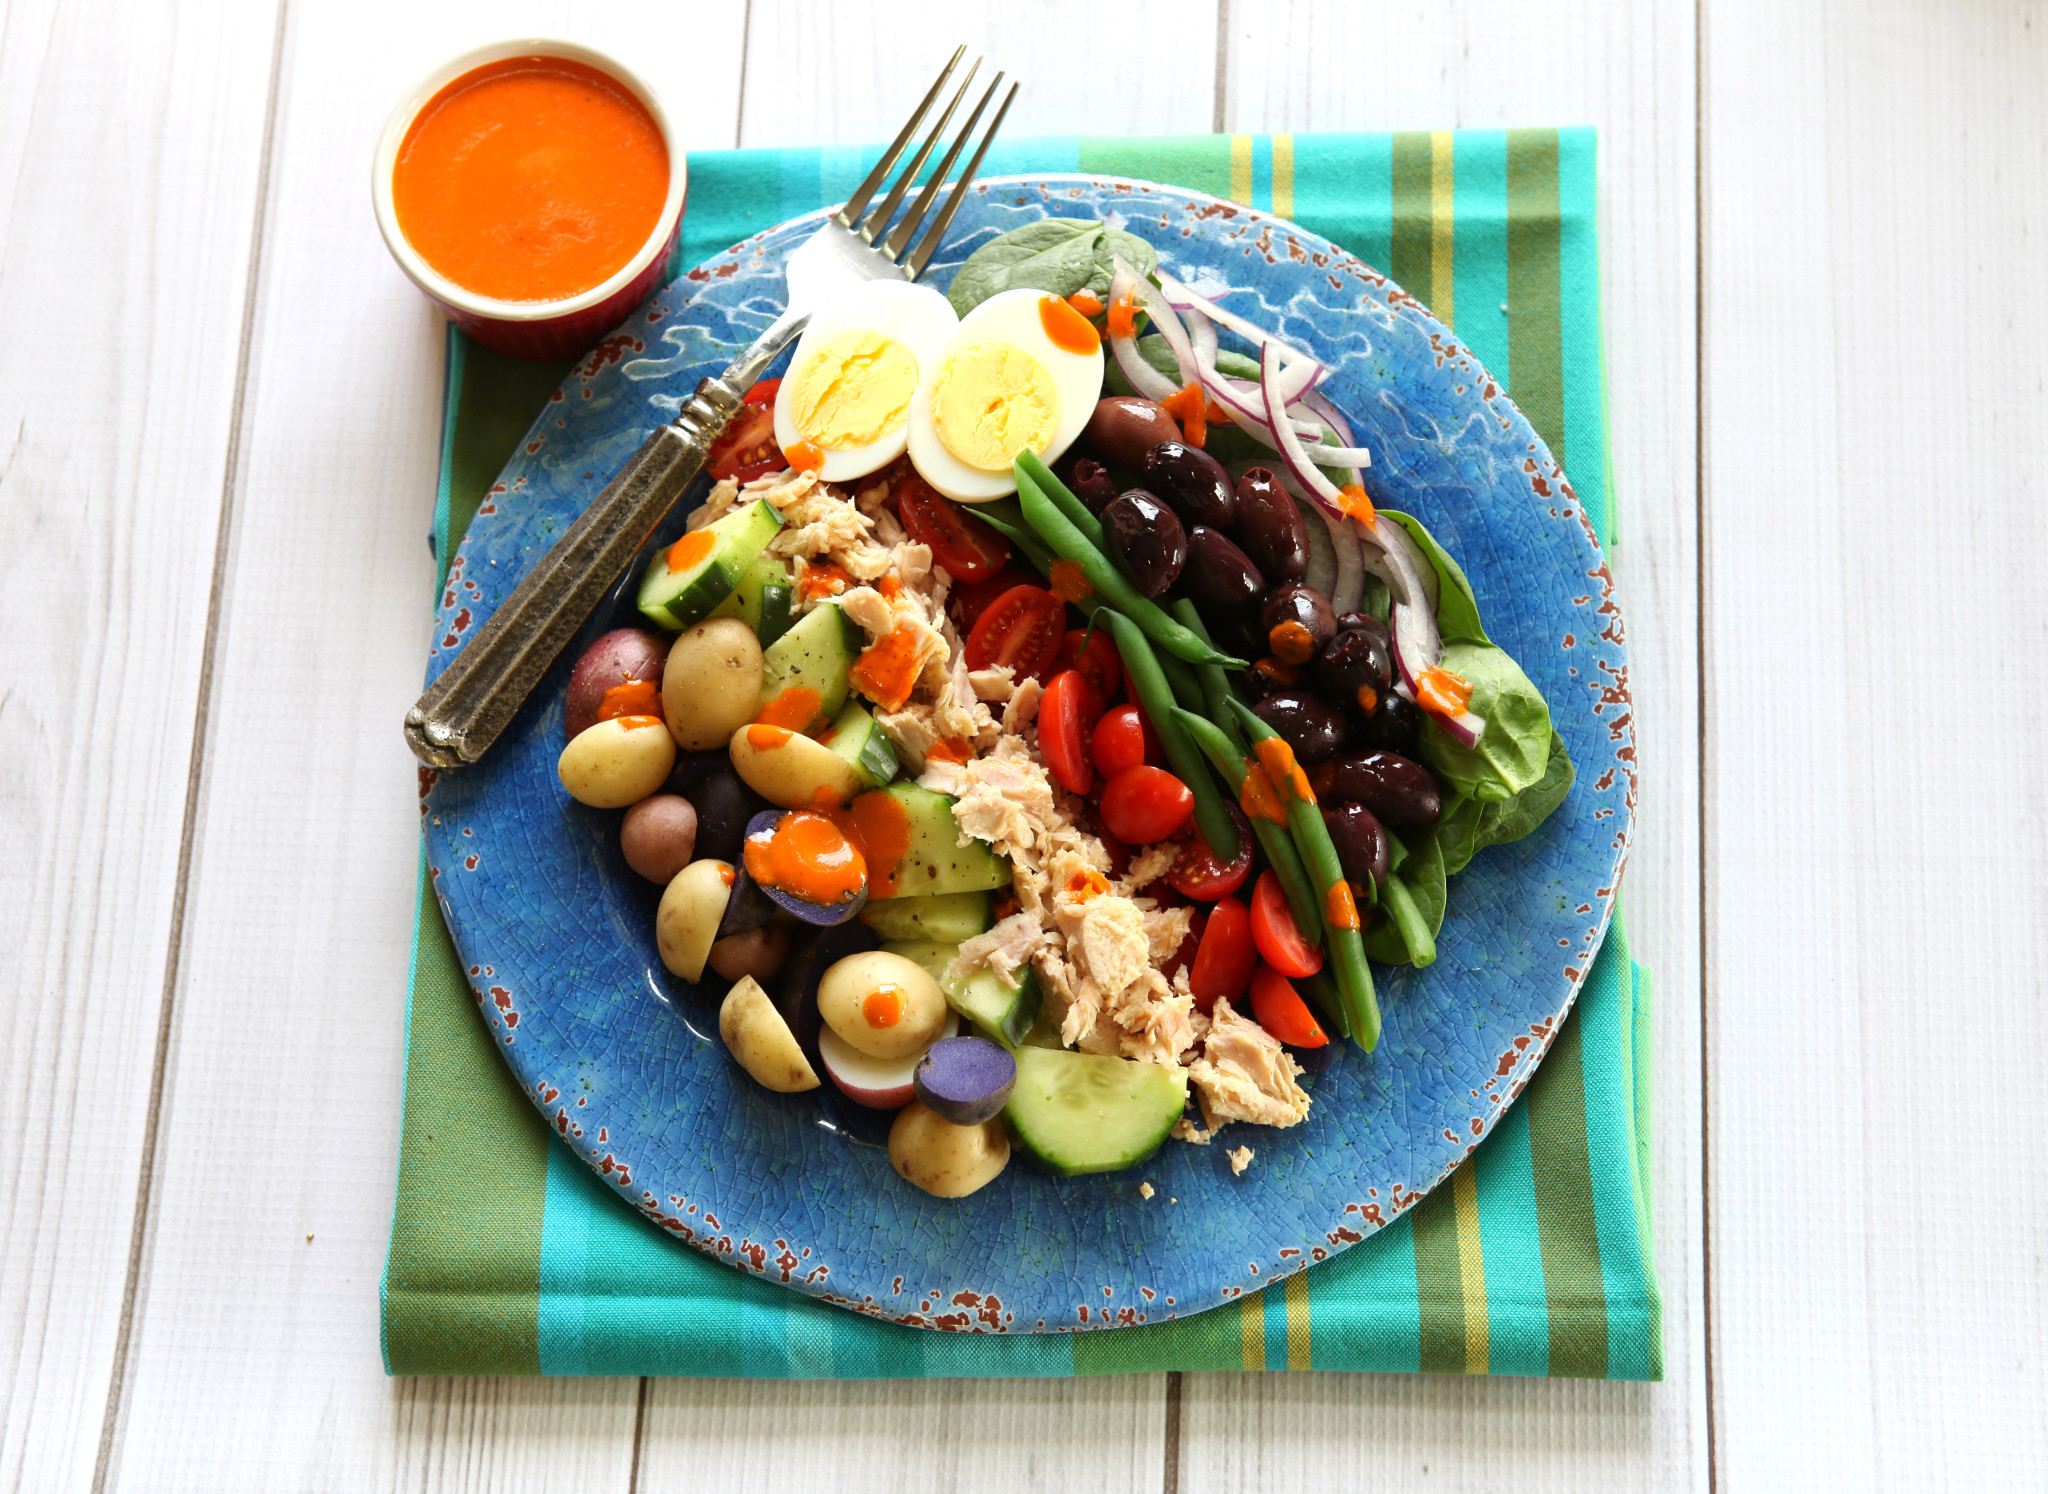 Salad Nicoise with Roasted Red Pepper Dressing